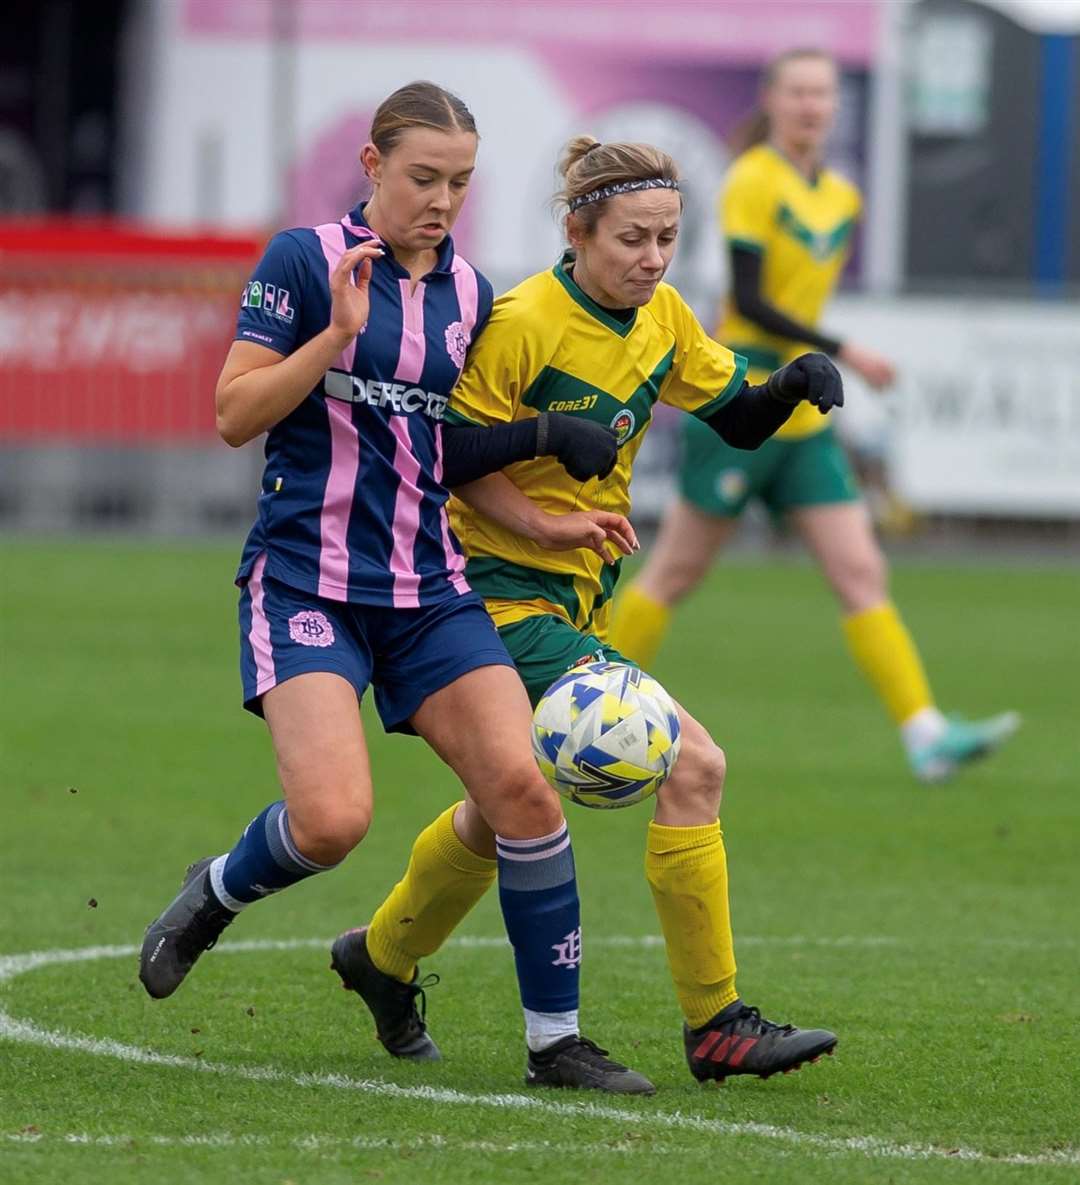 Goalscorer Becky Wyatt in action for Ashford Ladies at Dulwich. Picture: Ian Scammell